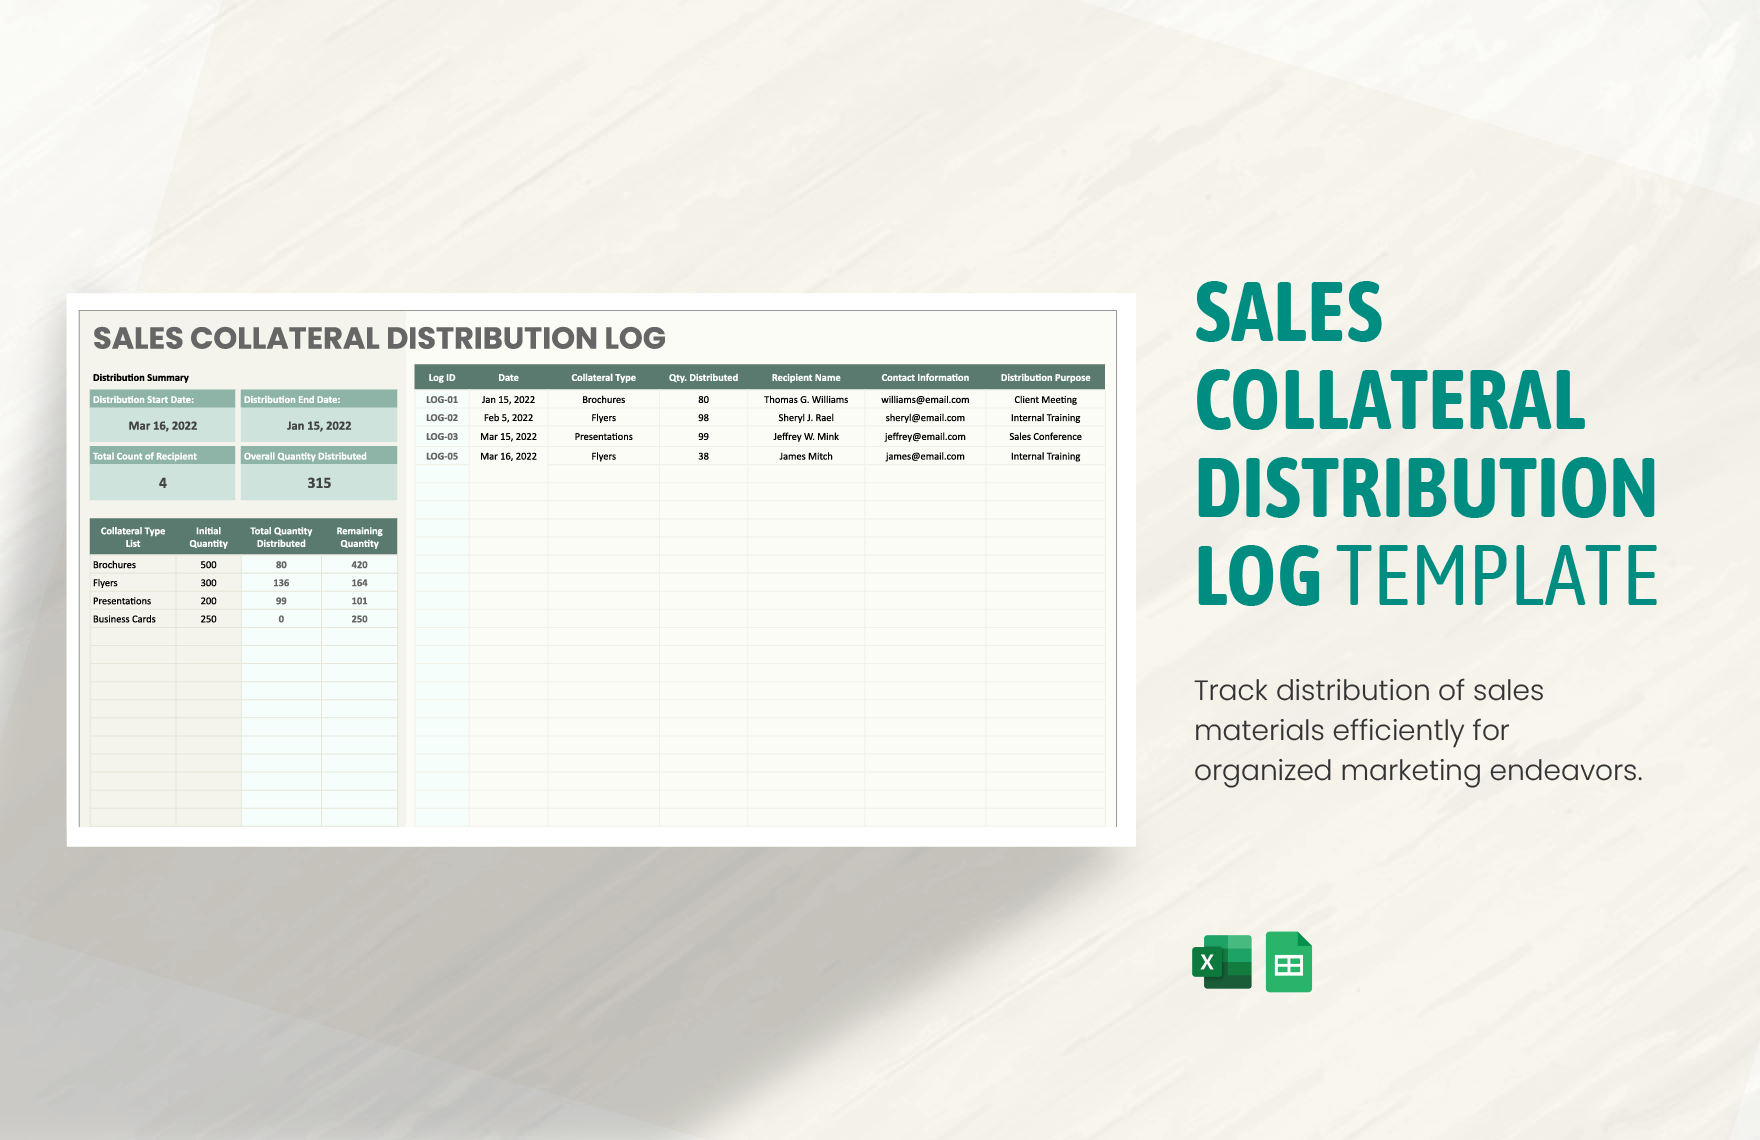 Sales Collateral Distribution Log Template